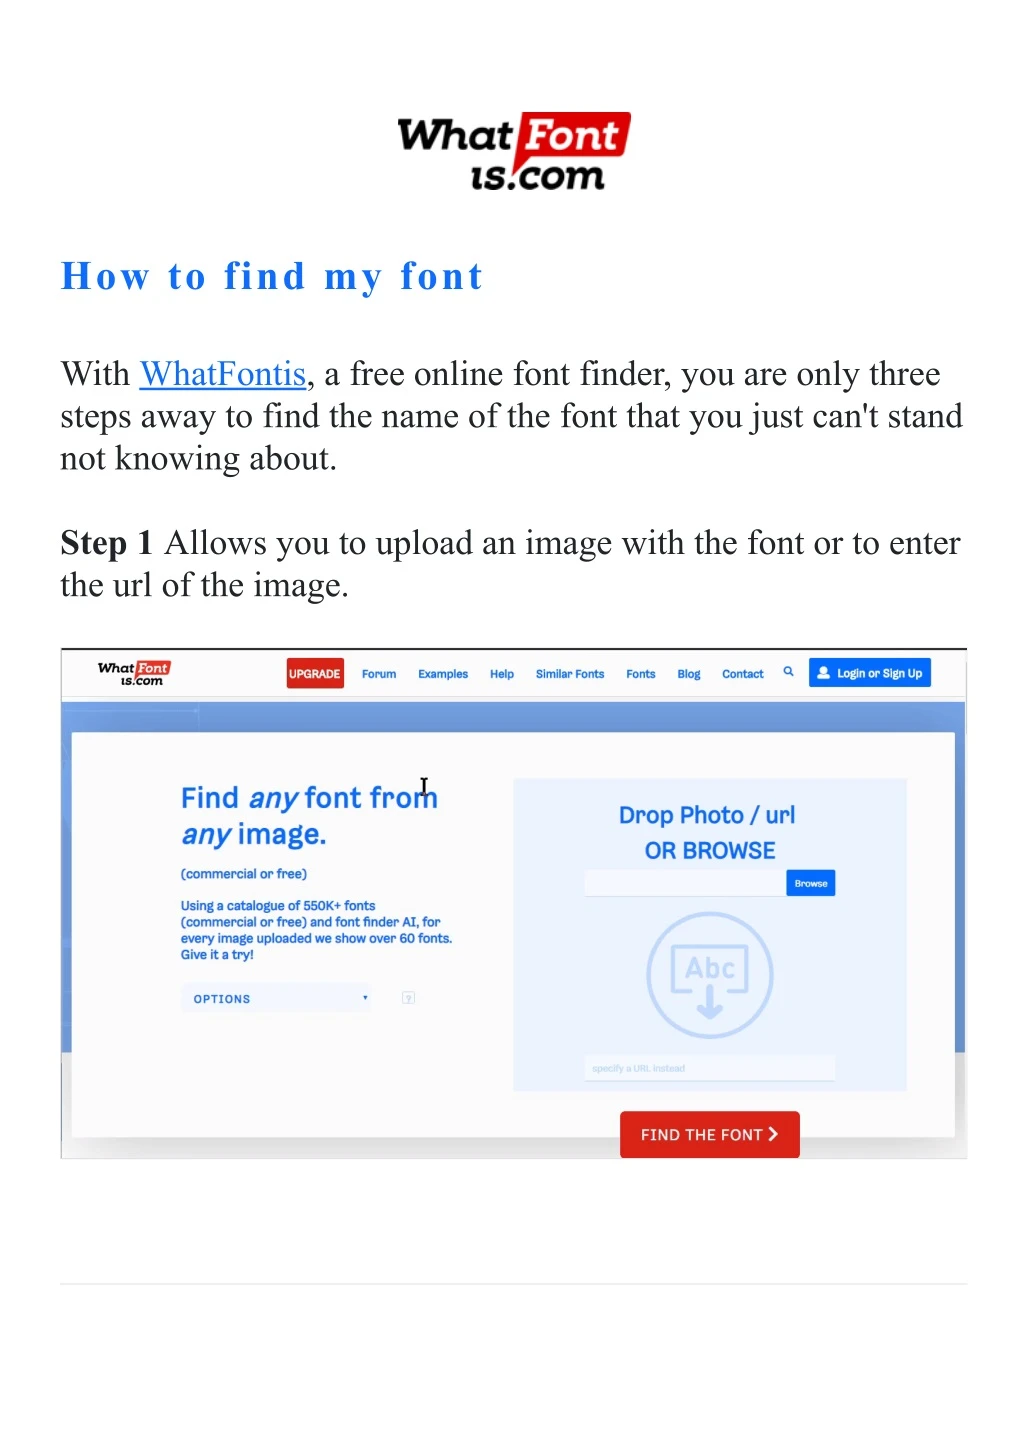 how to find my font